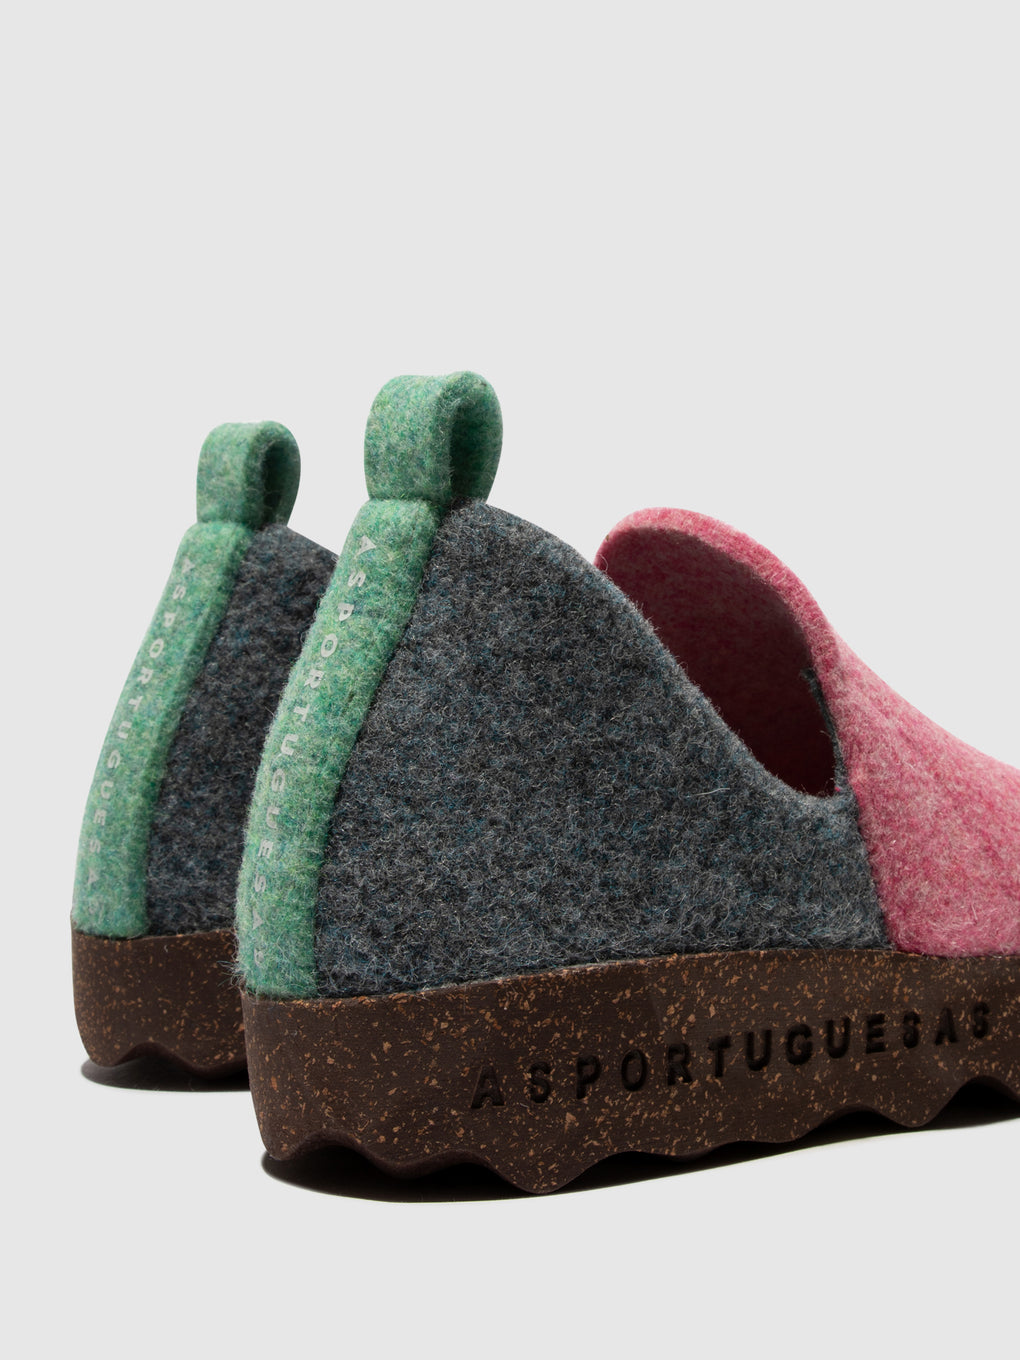 Round Toe Shoes CITY PINK/GREY BLUE